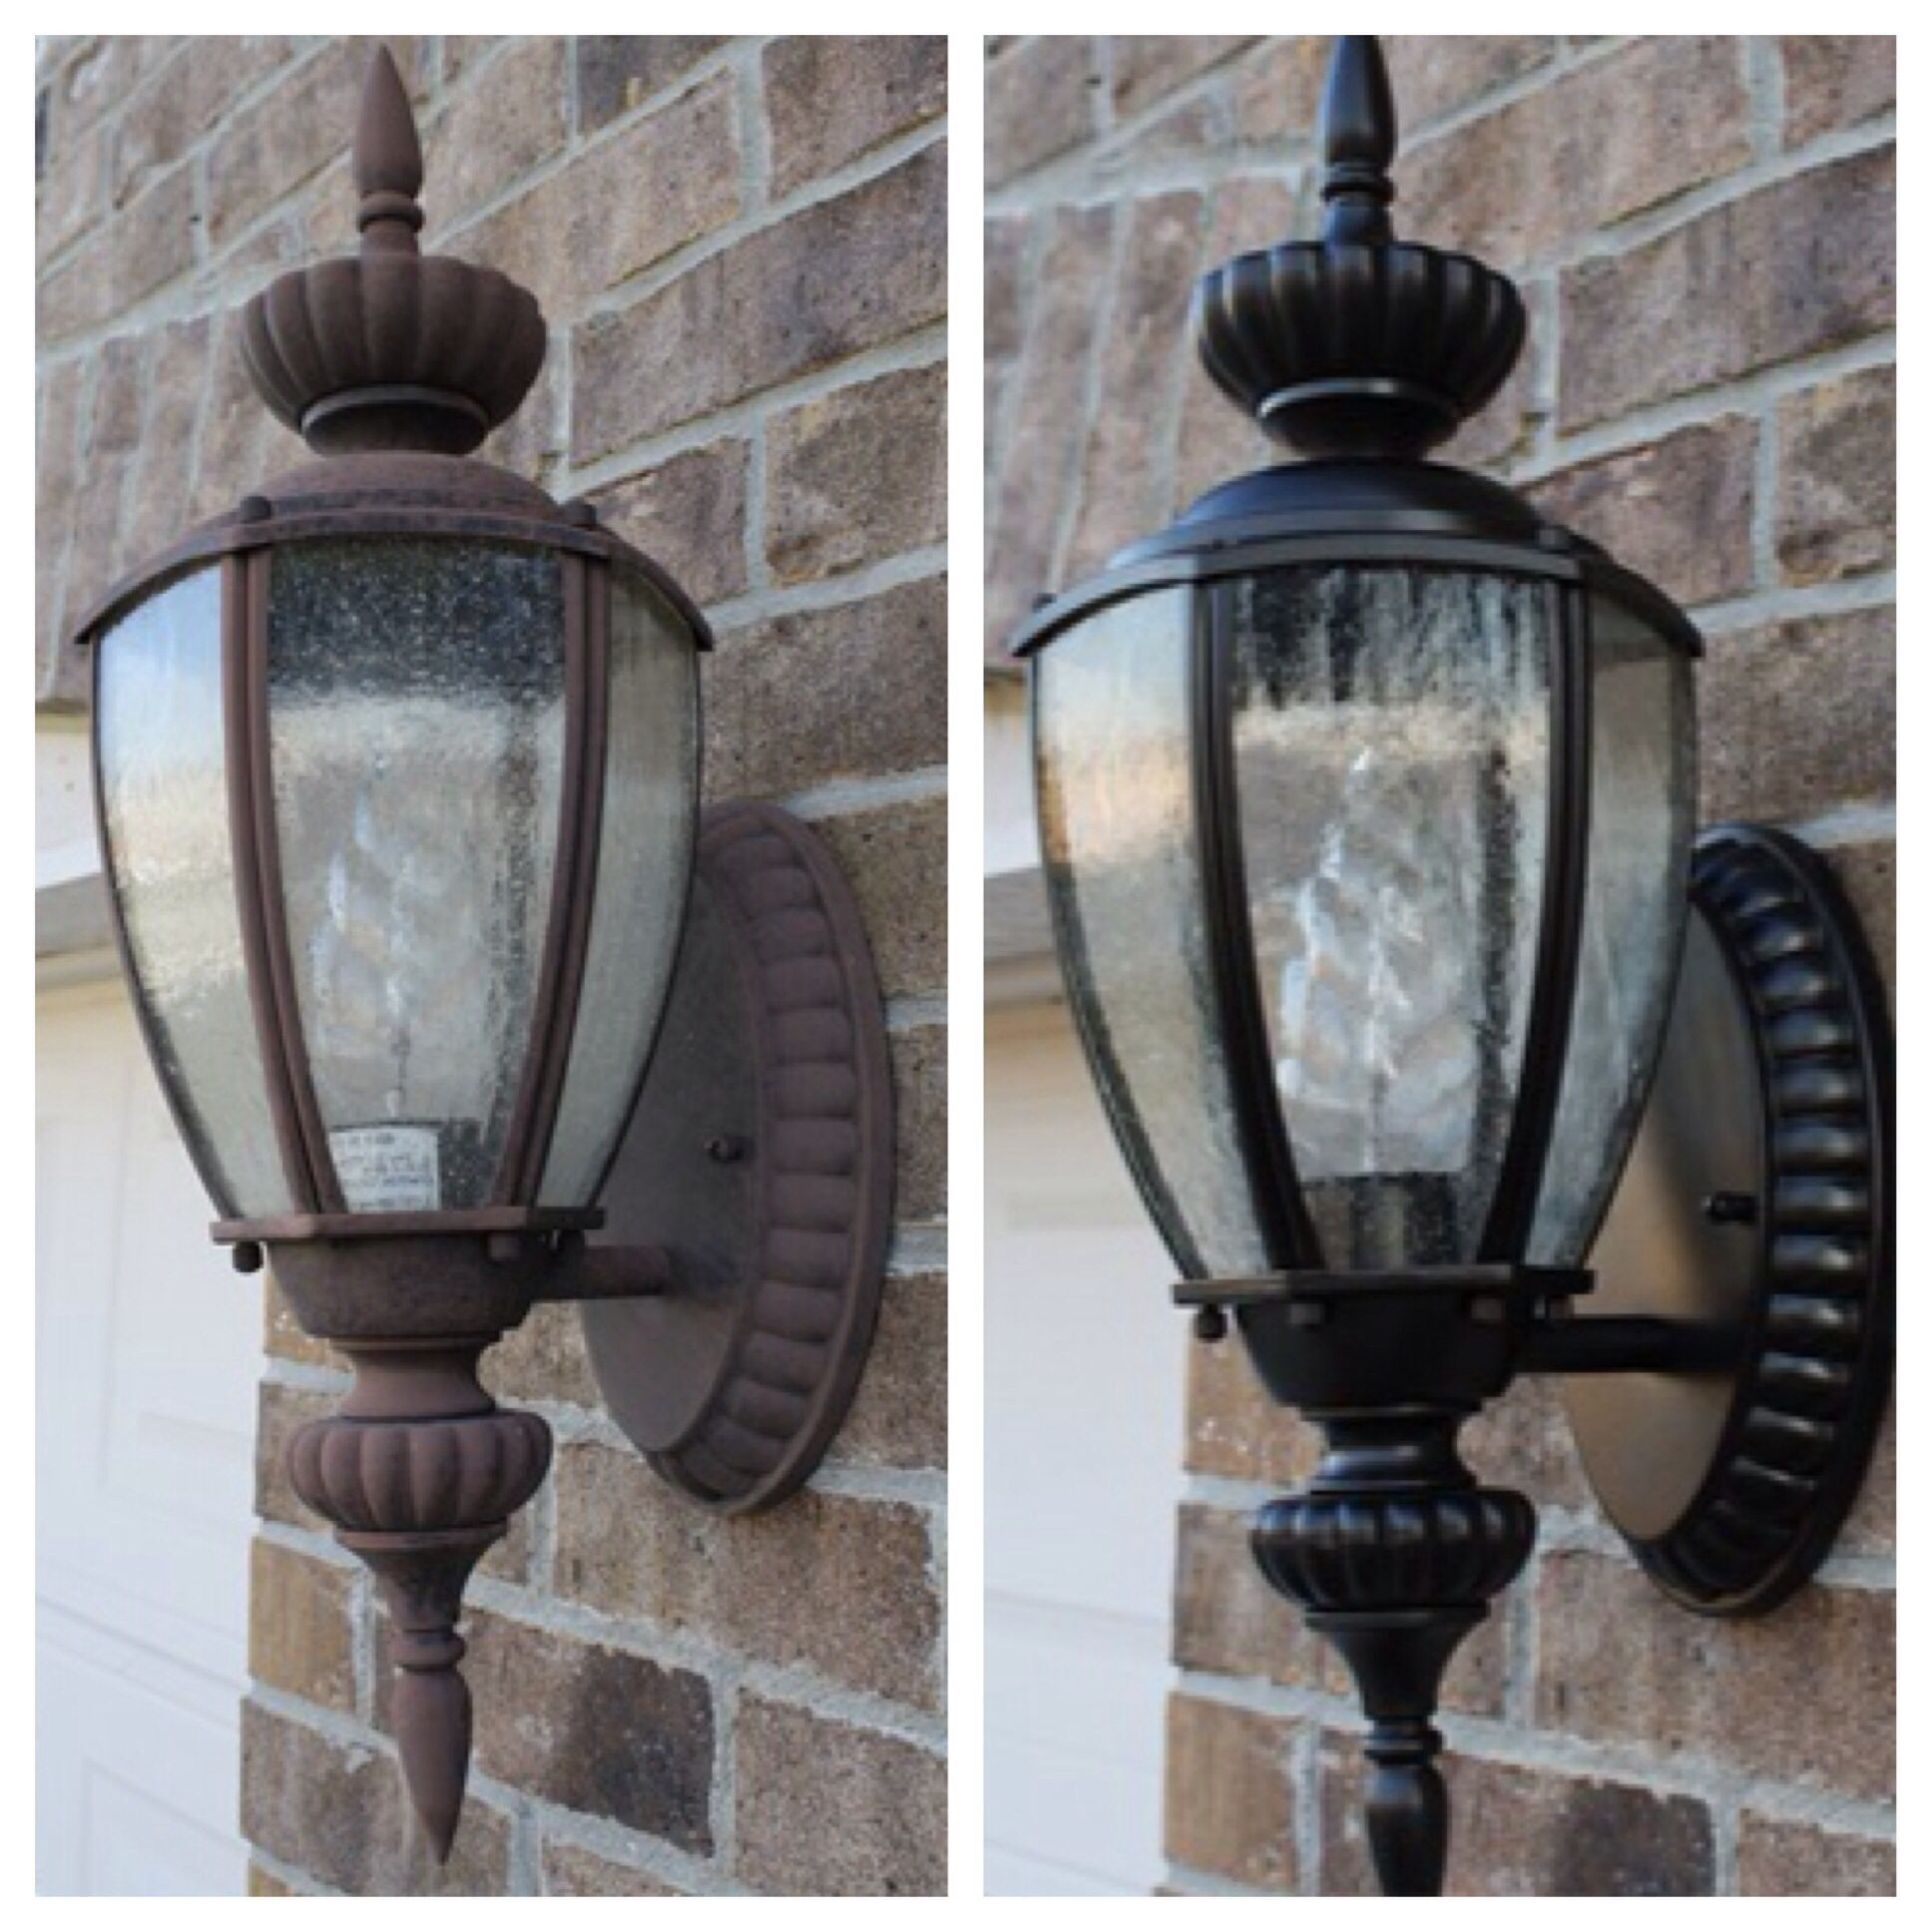 DIY Outdoor Lighting Fixtures
 Spray painting outdoor lights it works With images